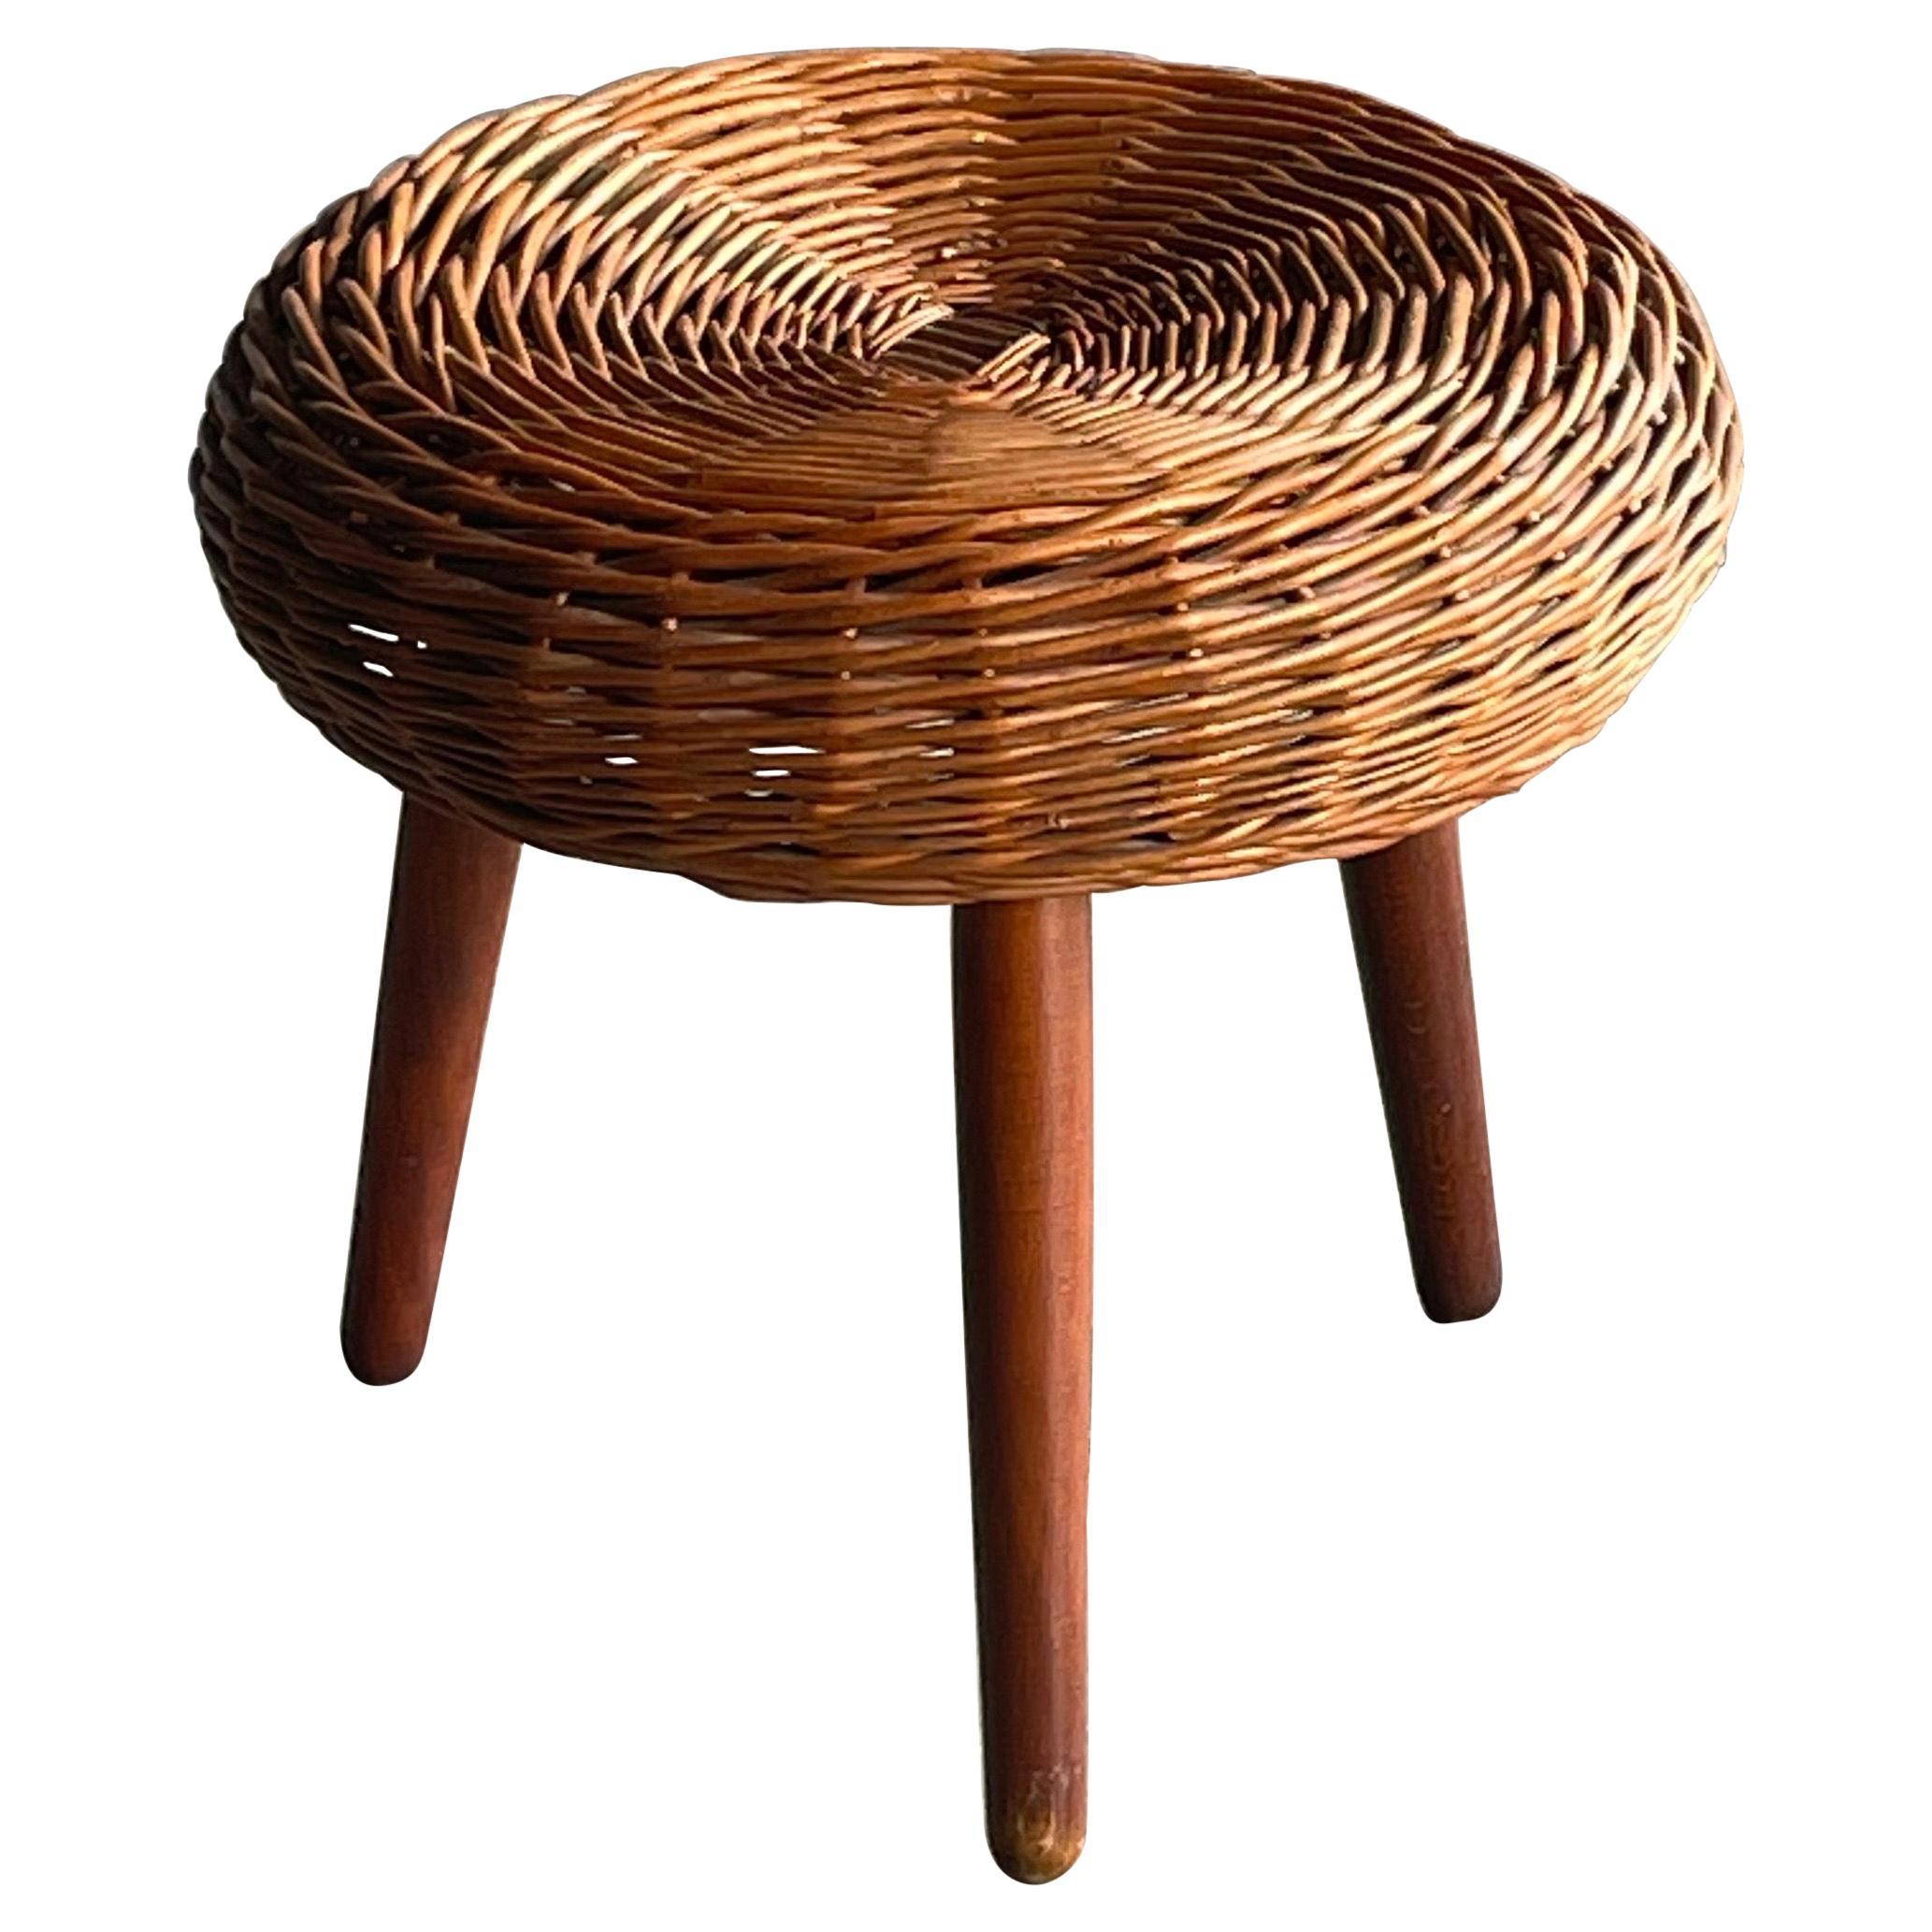 Tony Paul Attributed Tripod Stool or table, Rattan and Wood For Sale